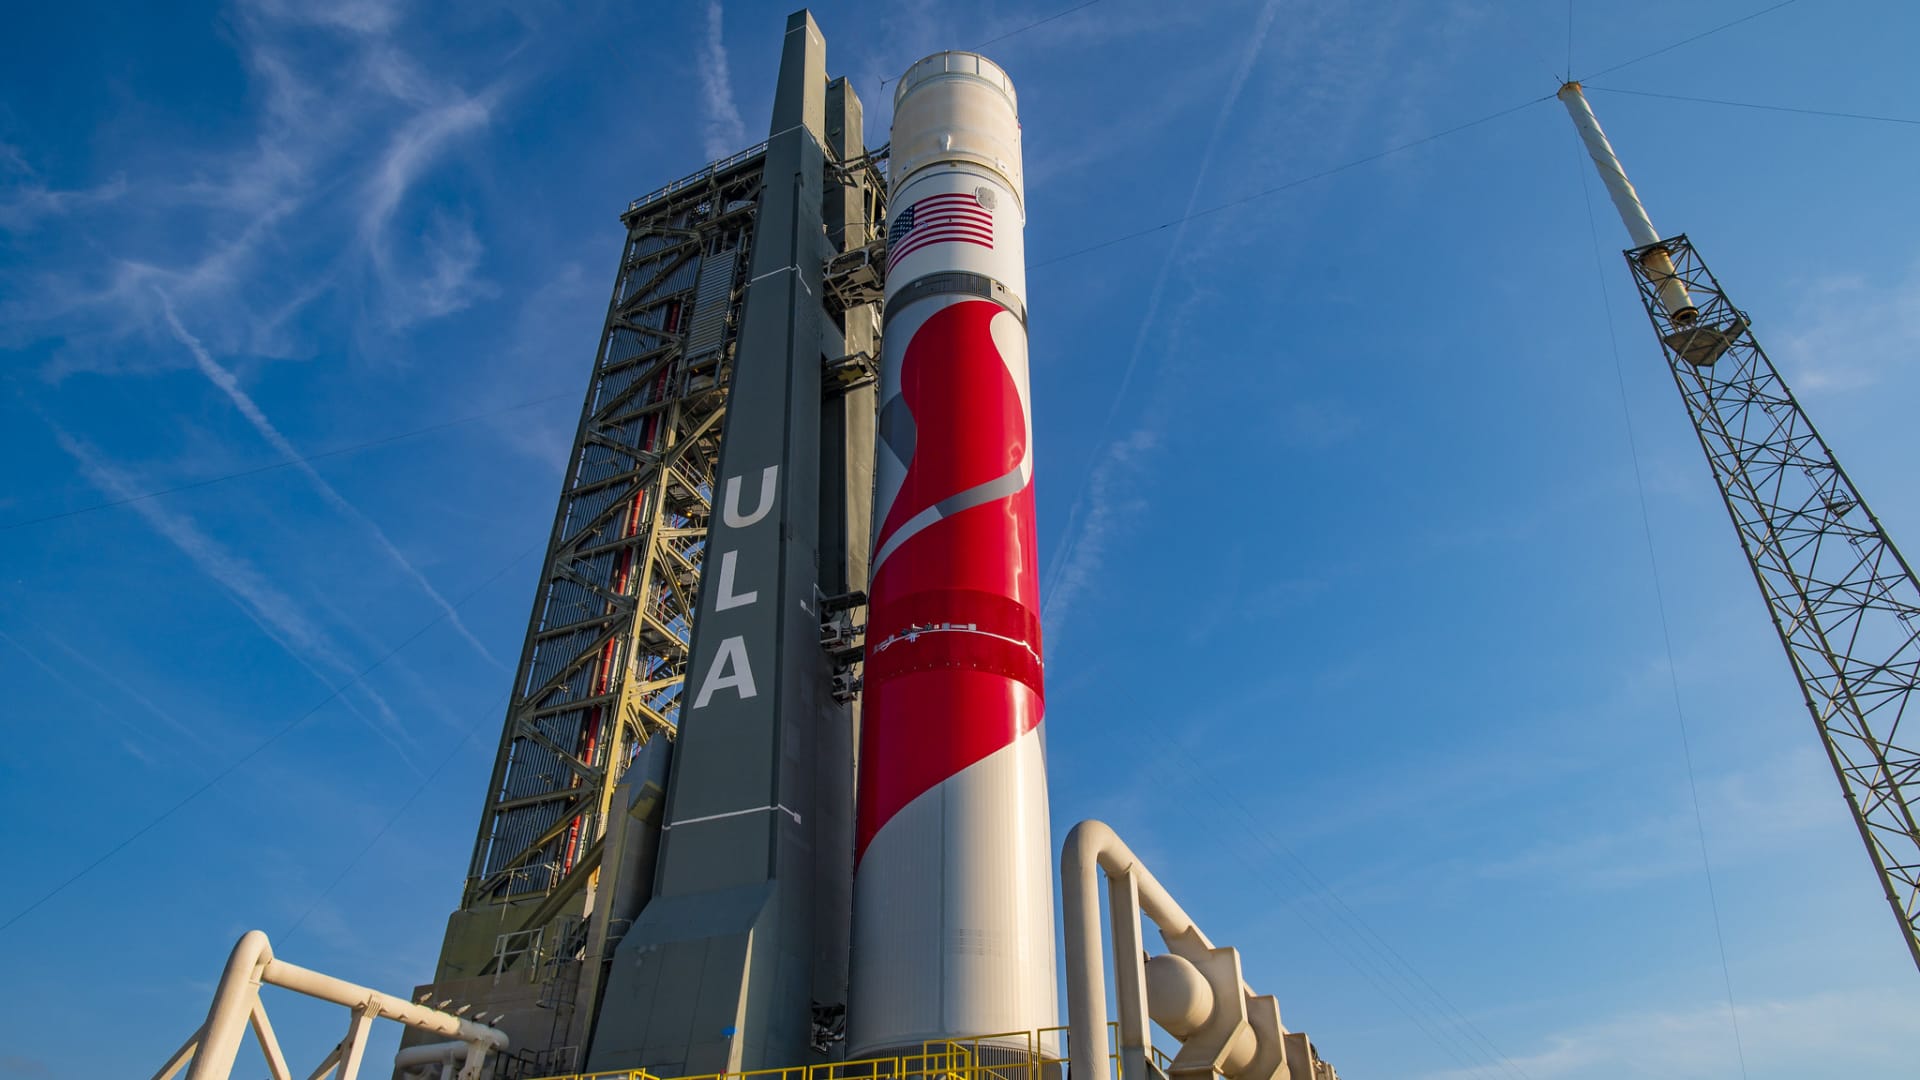 The Vulcan rocket for the Cert-1 mission stands at SLC-41 during testing in Cape Canaveral, Florida, May 12, 2023.